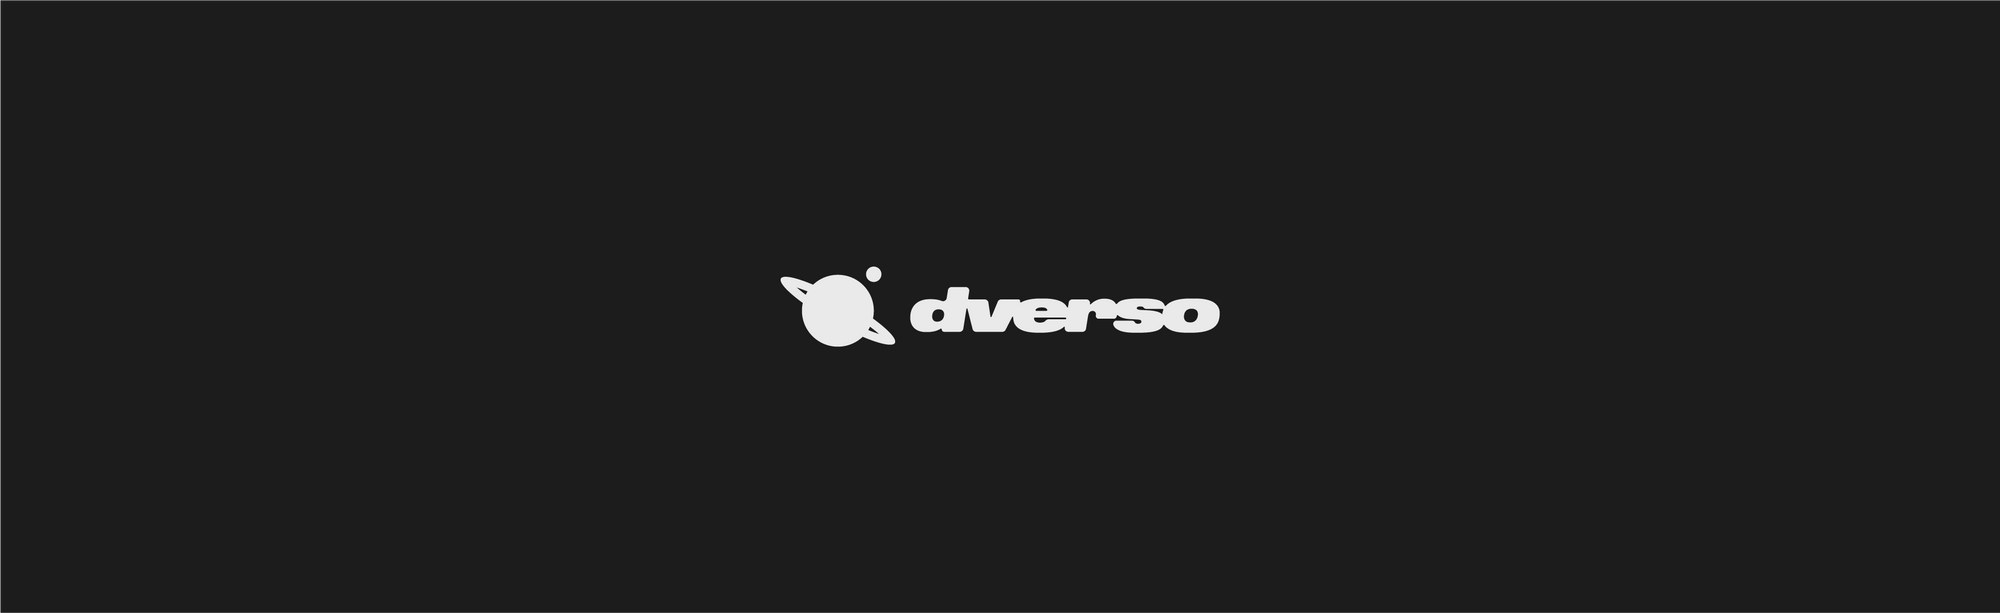 , Dverso Launches Open Alpha of Italy’s Leading Web3 Metaverse